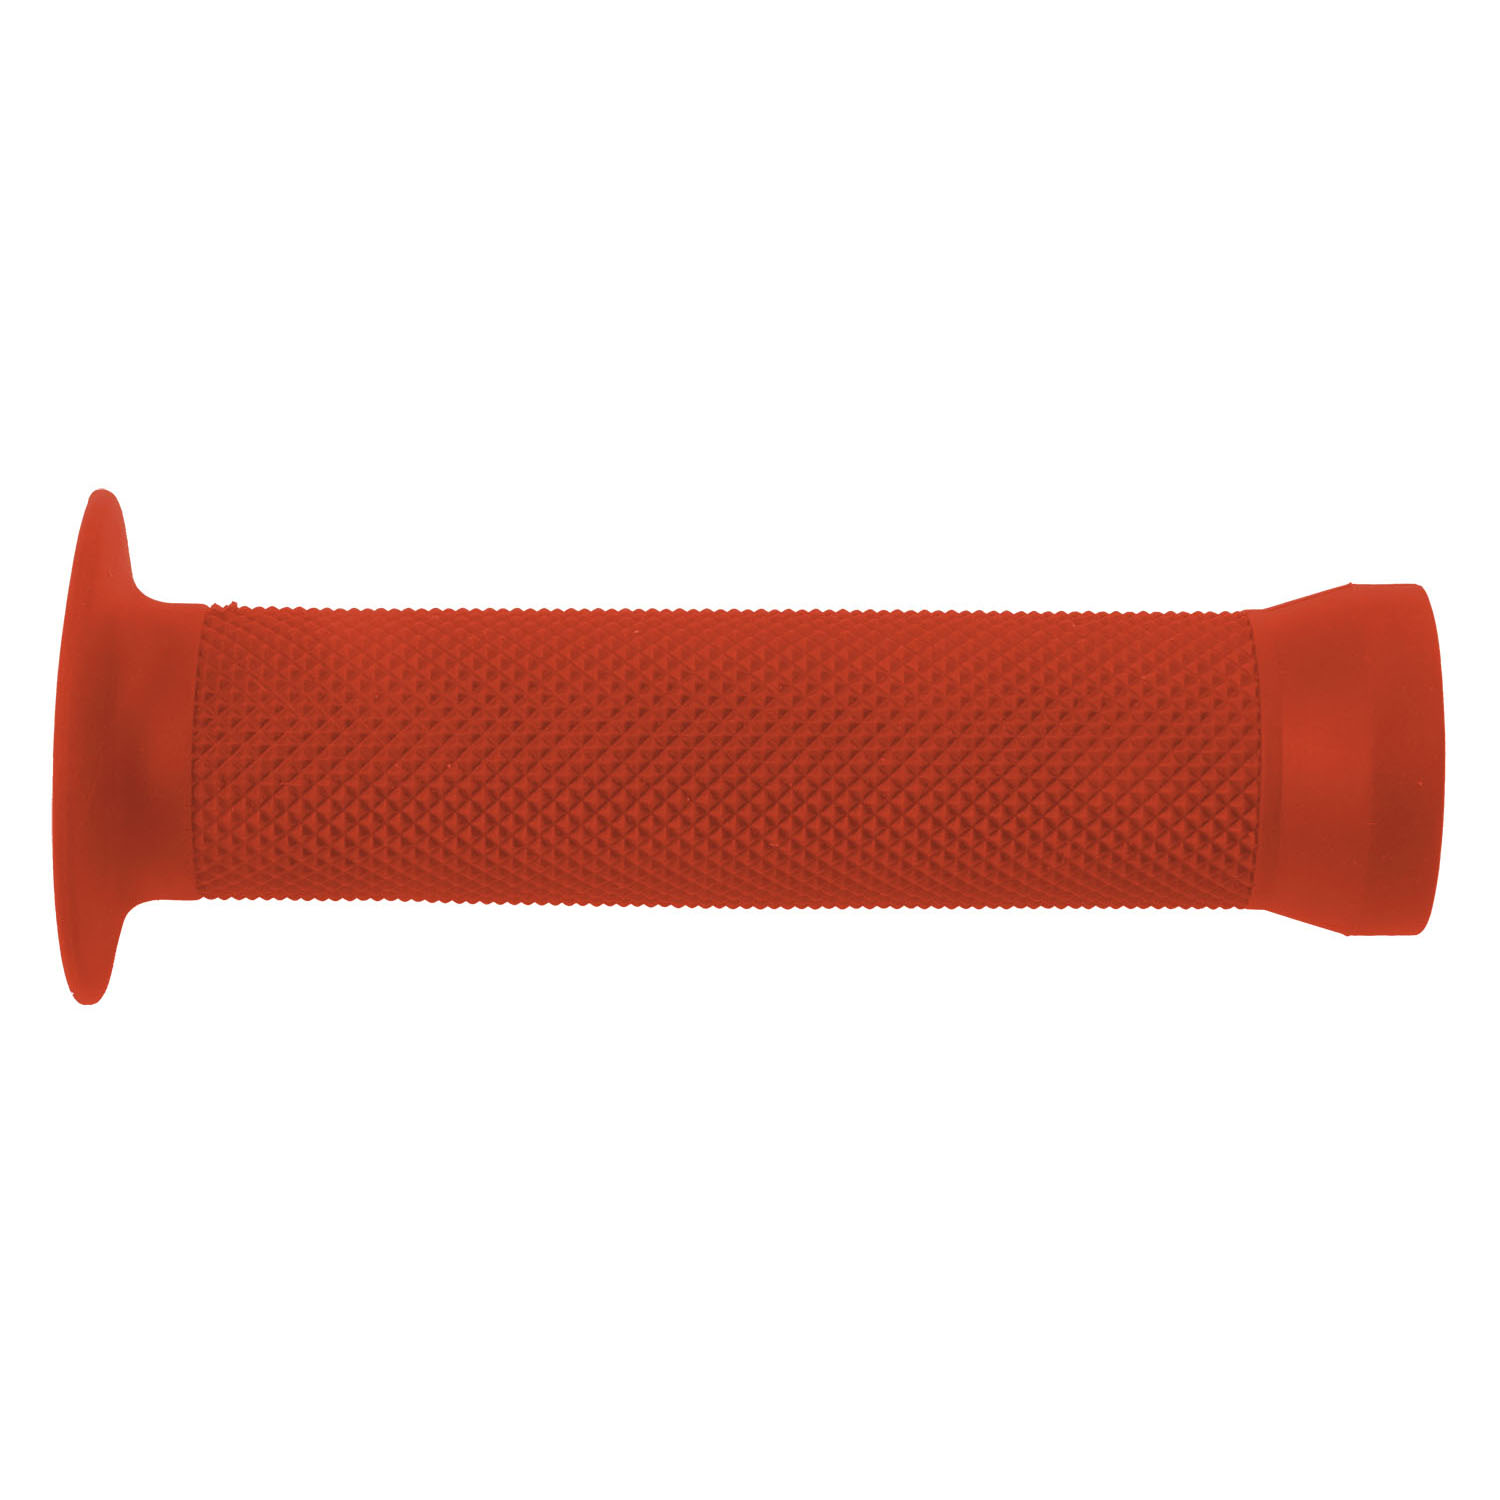 P4B BMX Griffe 130/130 mm in Rot, 1 Paar